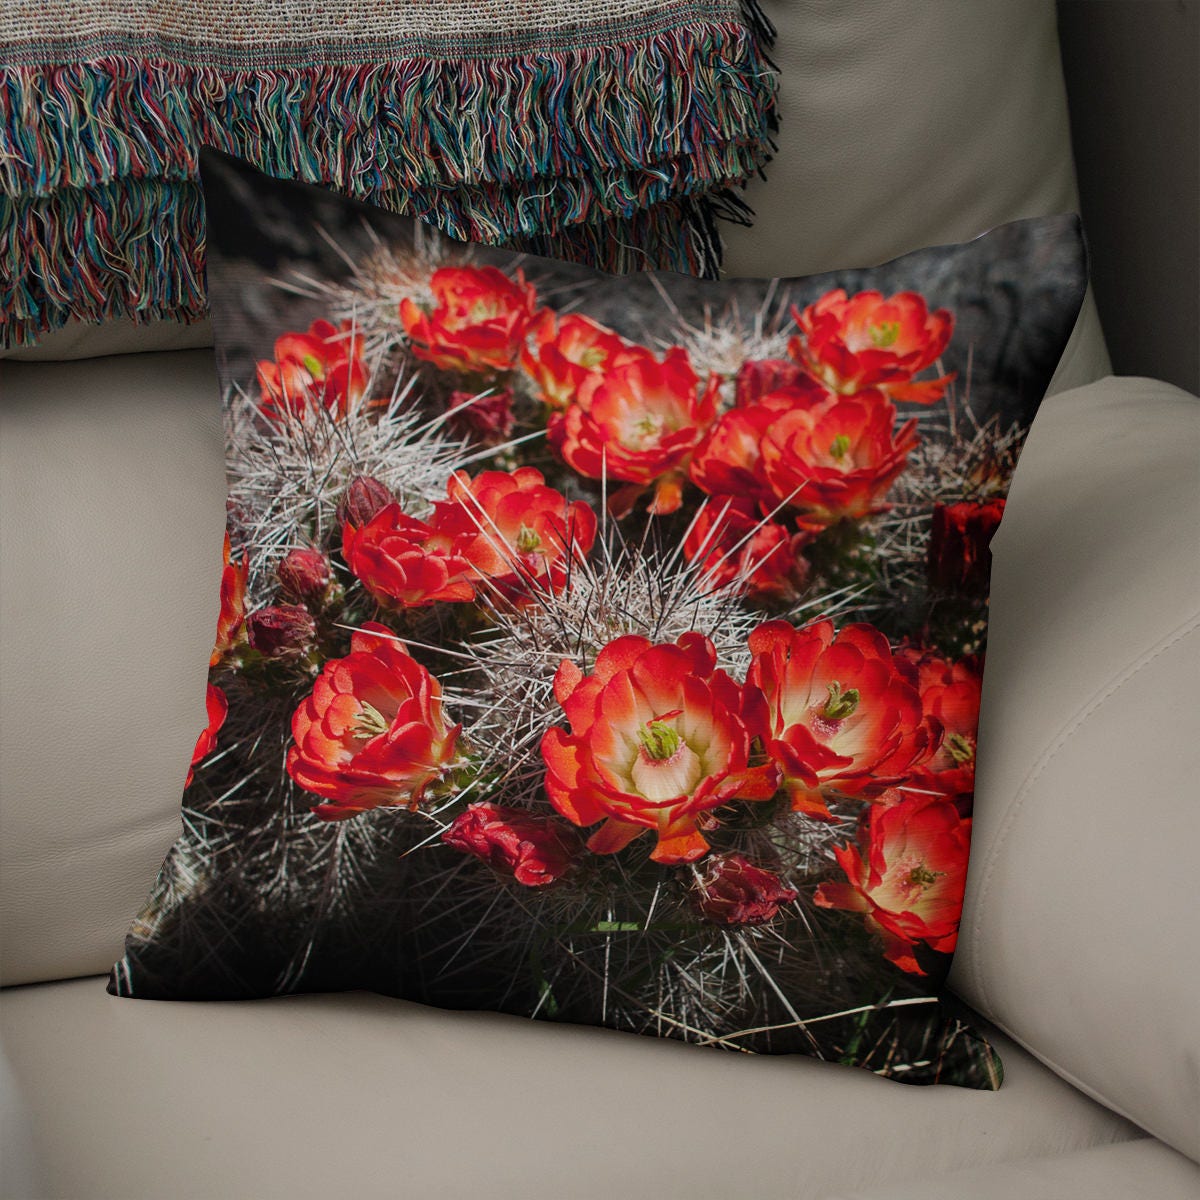 Black and Red Cactus Flowers Throw Pillow Cover - Pillows